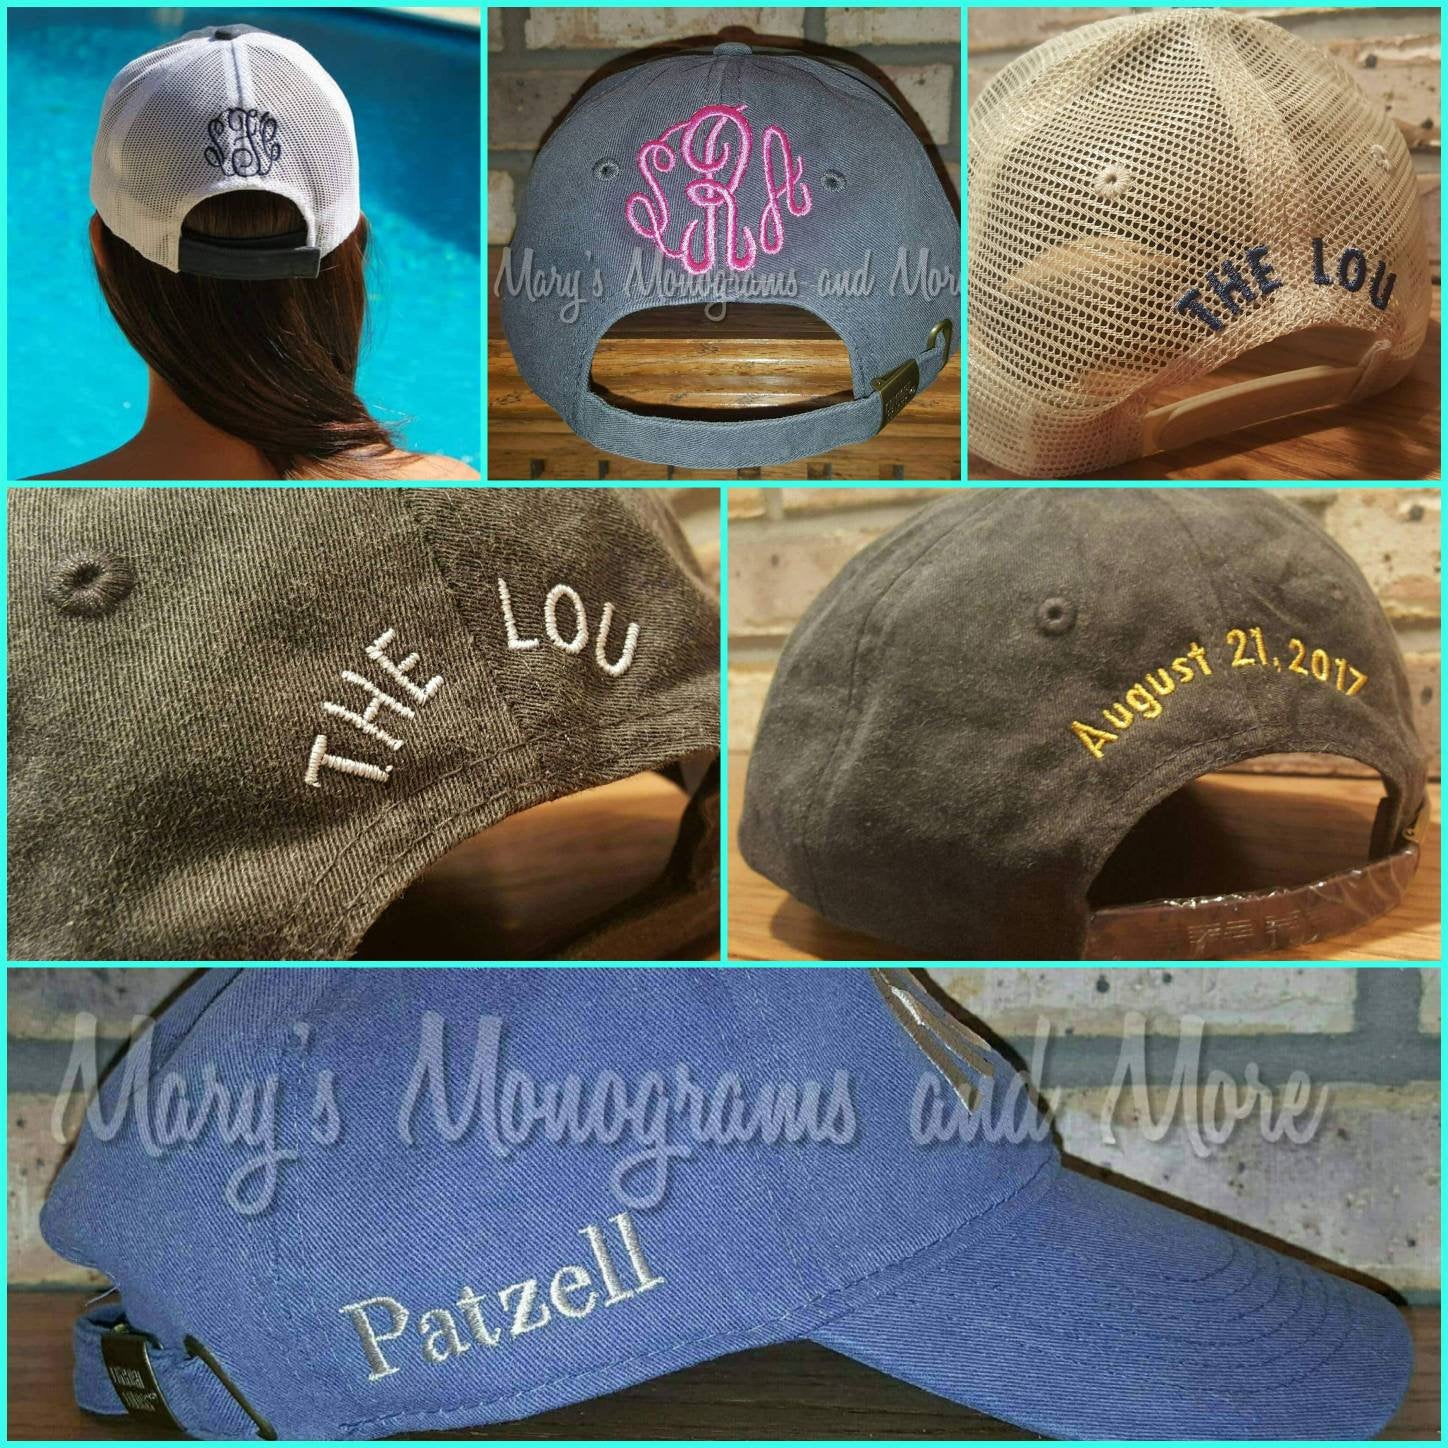 Embroidered Golf Hats  The Coconut Cap Dad Hat by Kenny Flowers